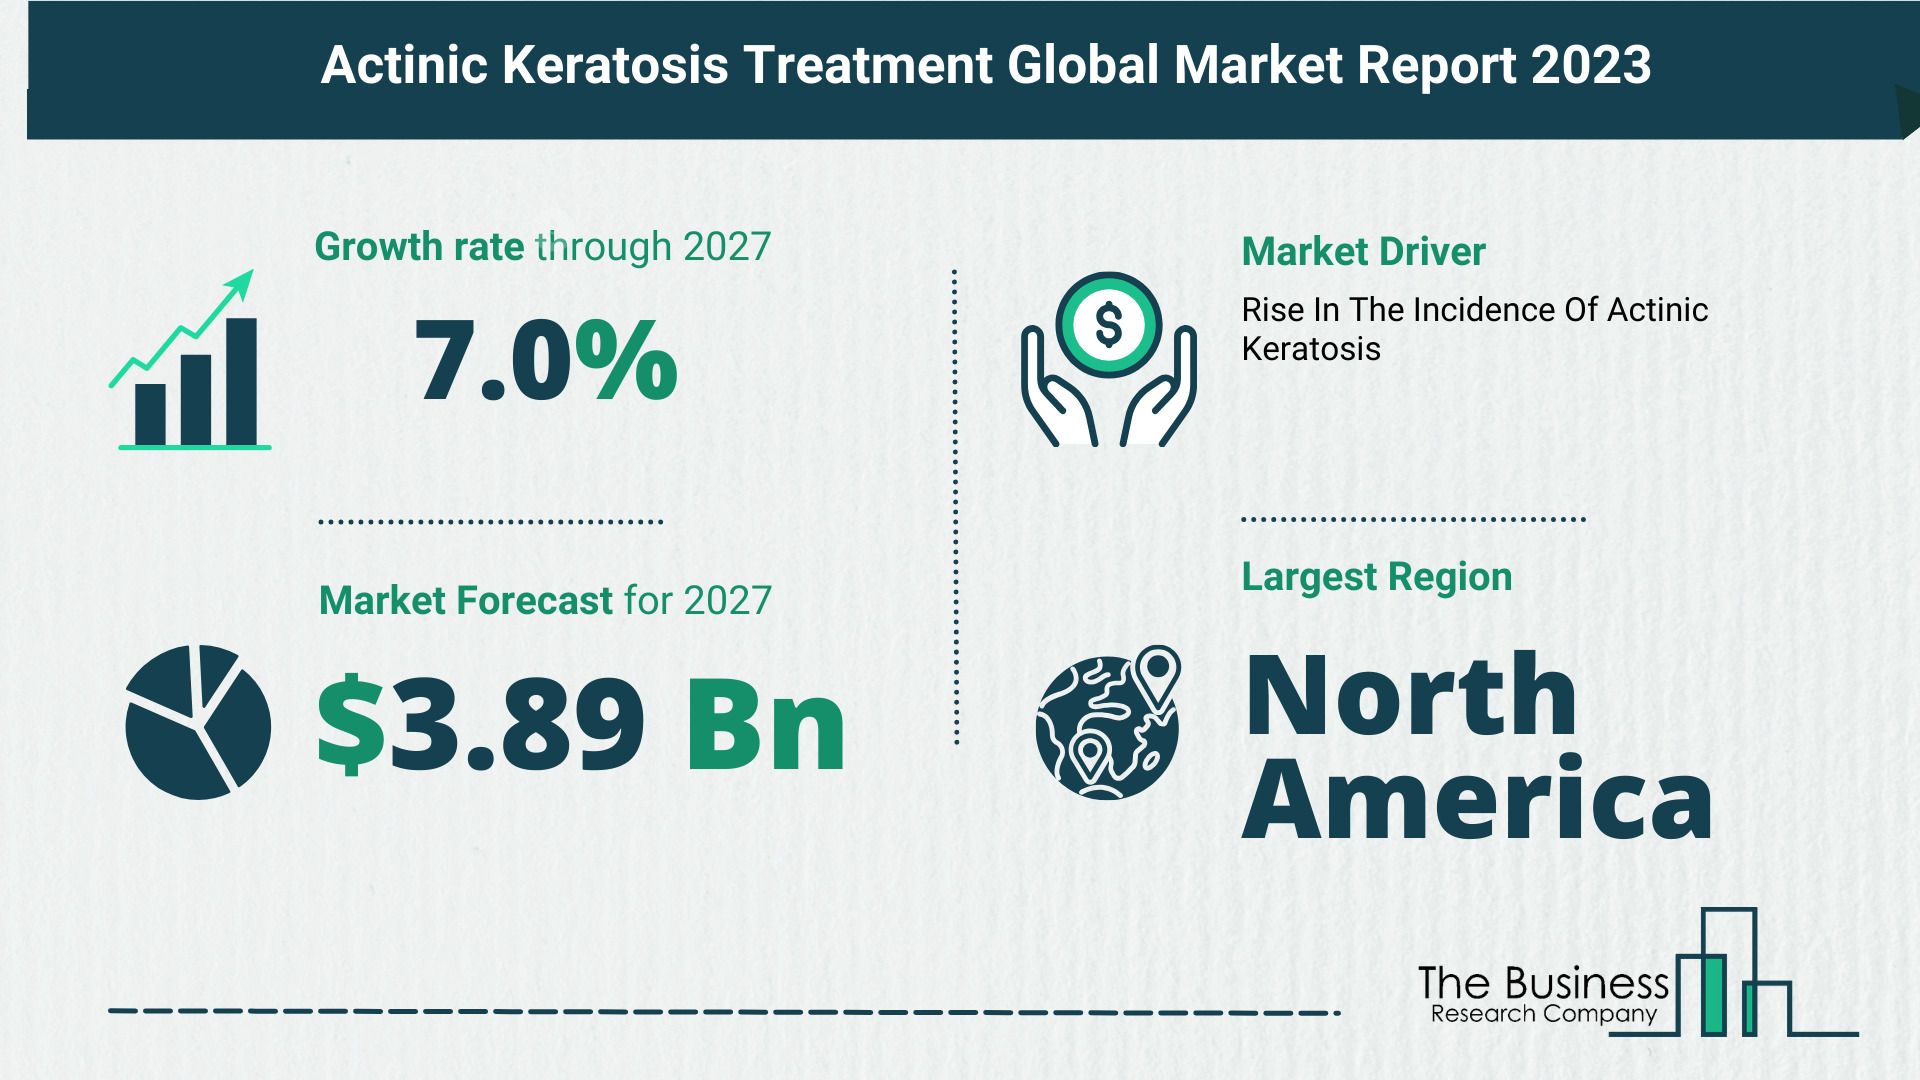 Top 5 Insights From The Actinic Keratosis Treatment Market Report 2023